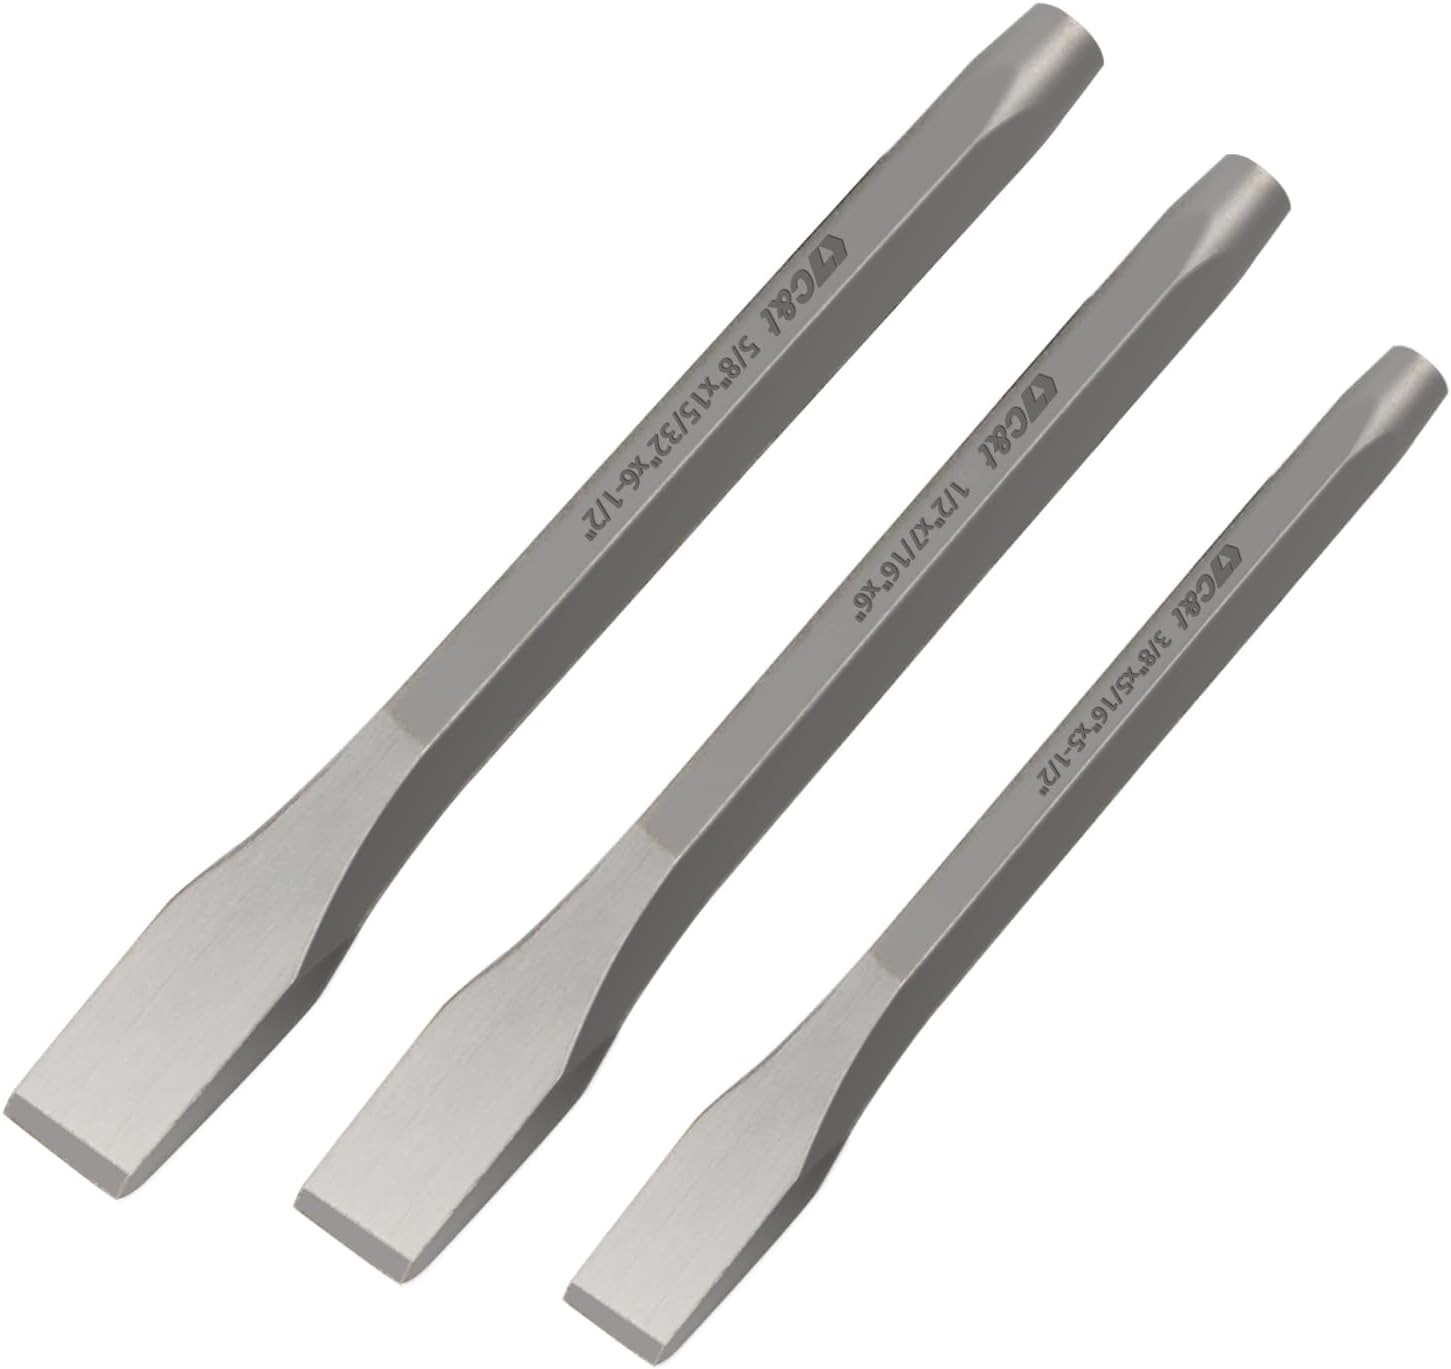 3-Piece Heavy Duty All Purpose Cold Chisels Kit, 3/8, 1/2, 5/8 in, for Carpentry